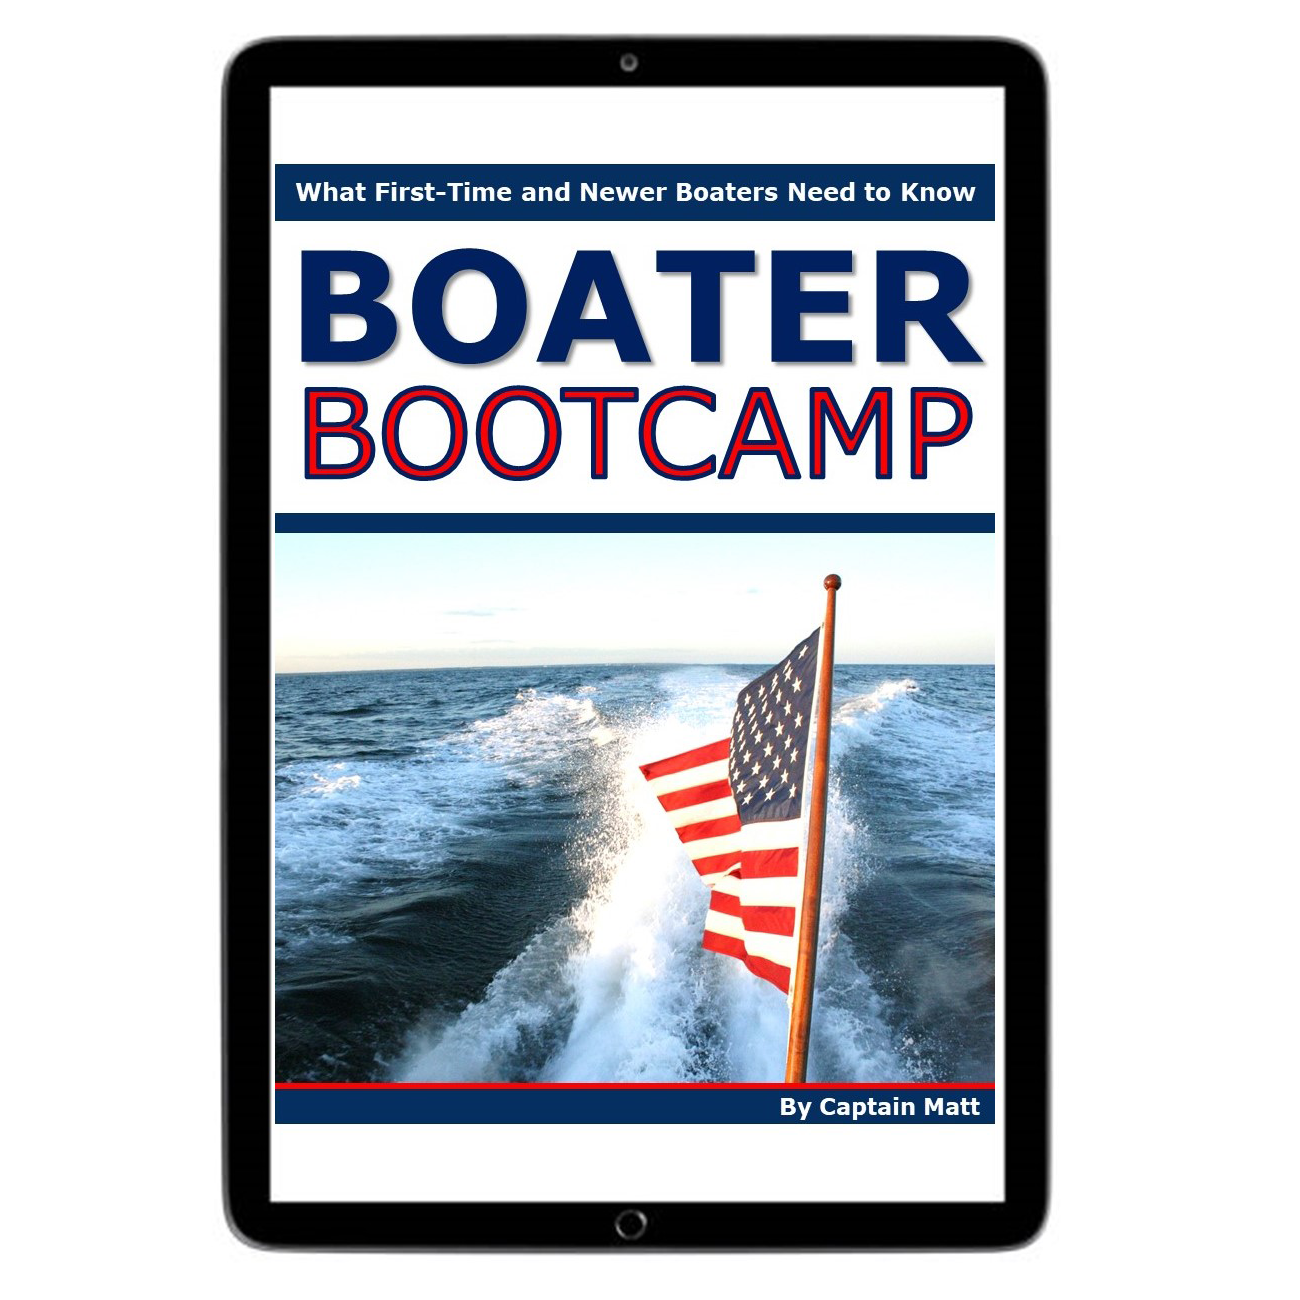 Boater Bootcamp